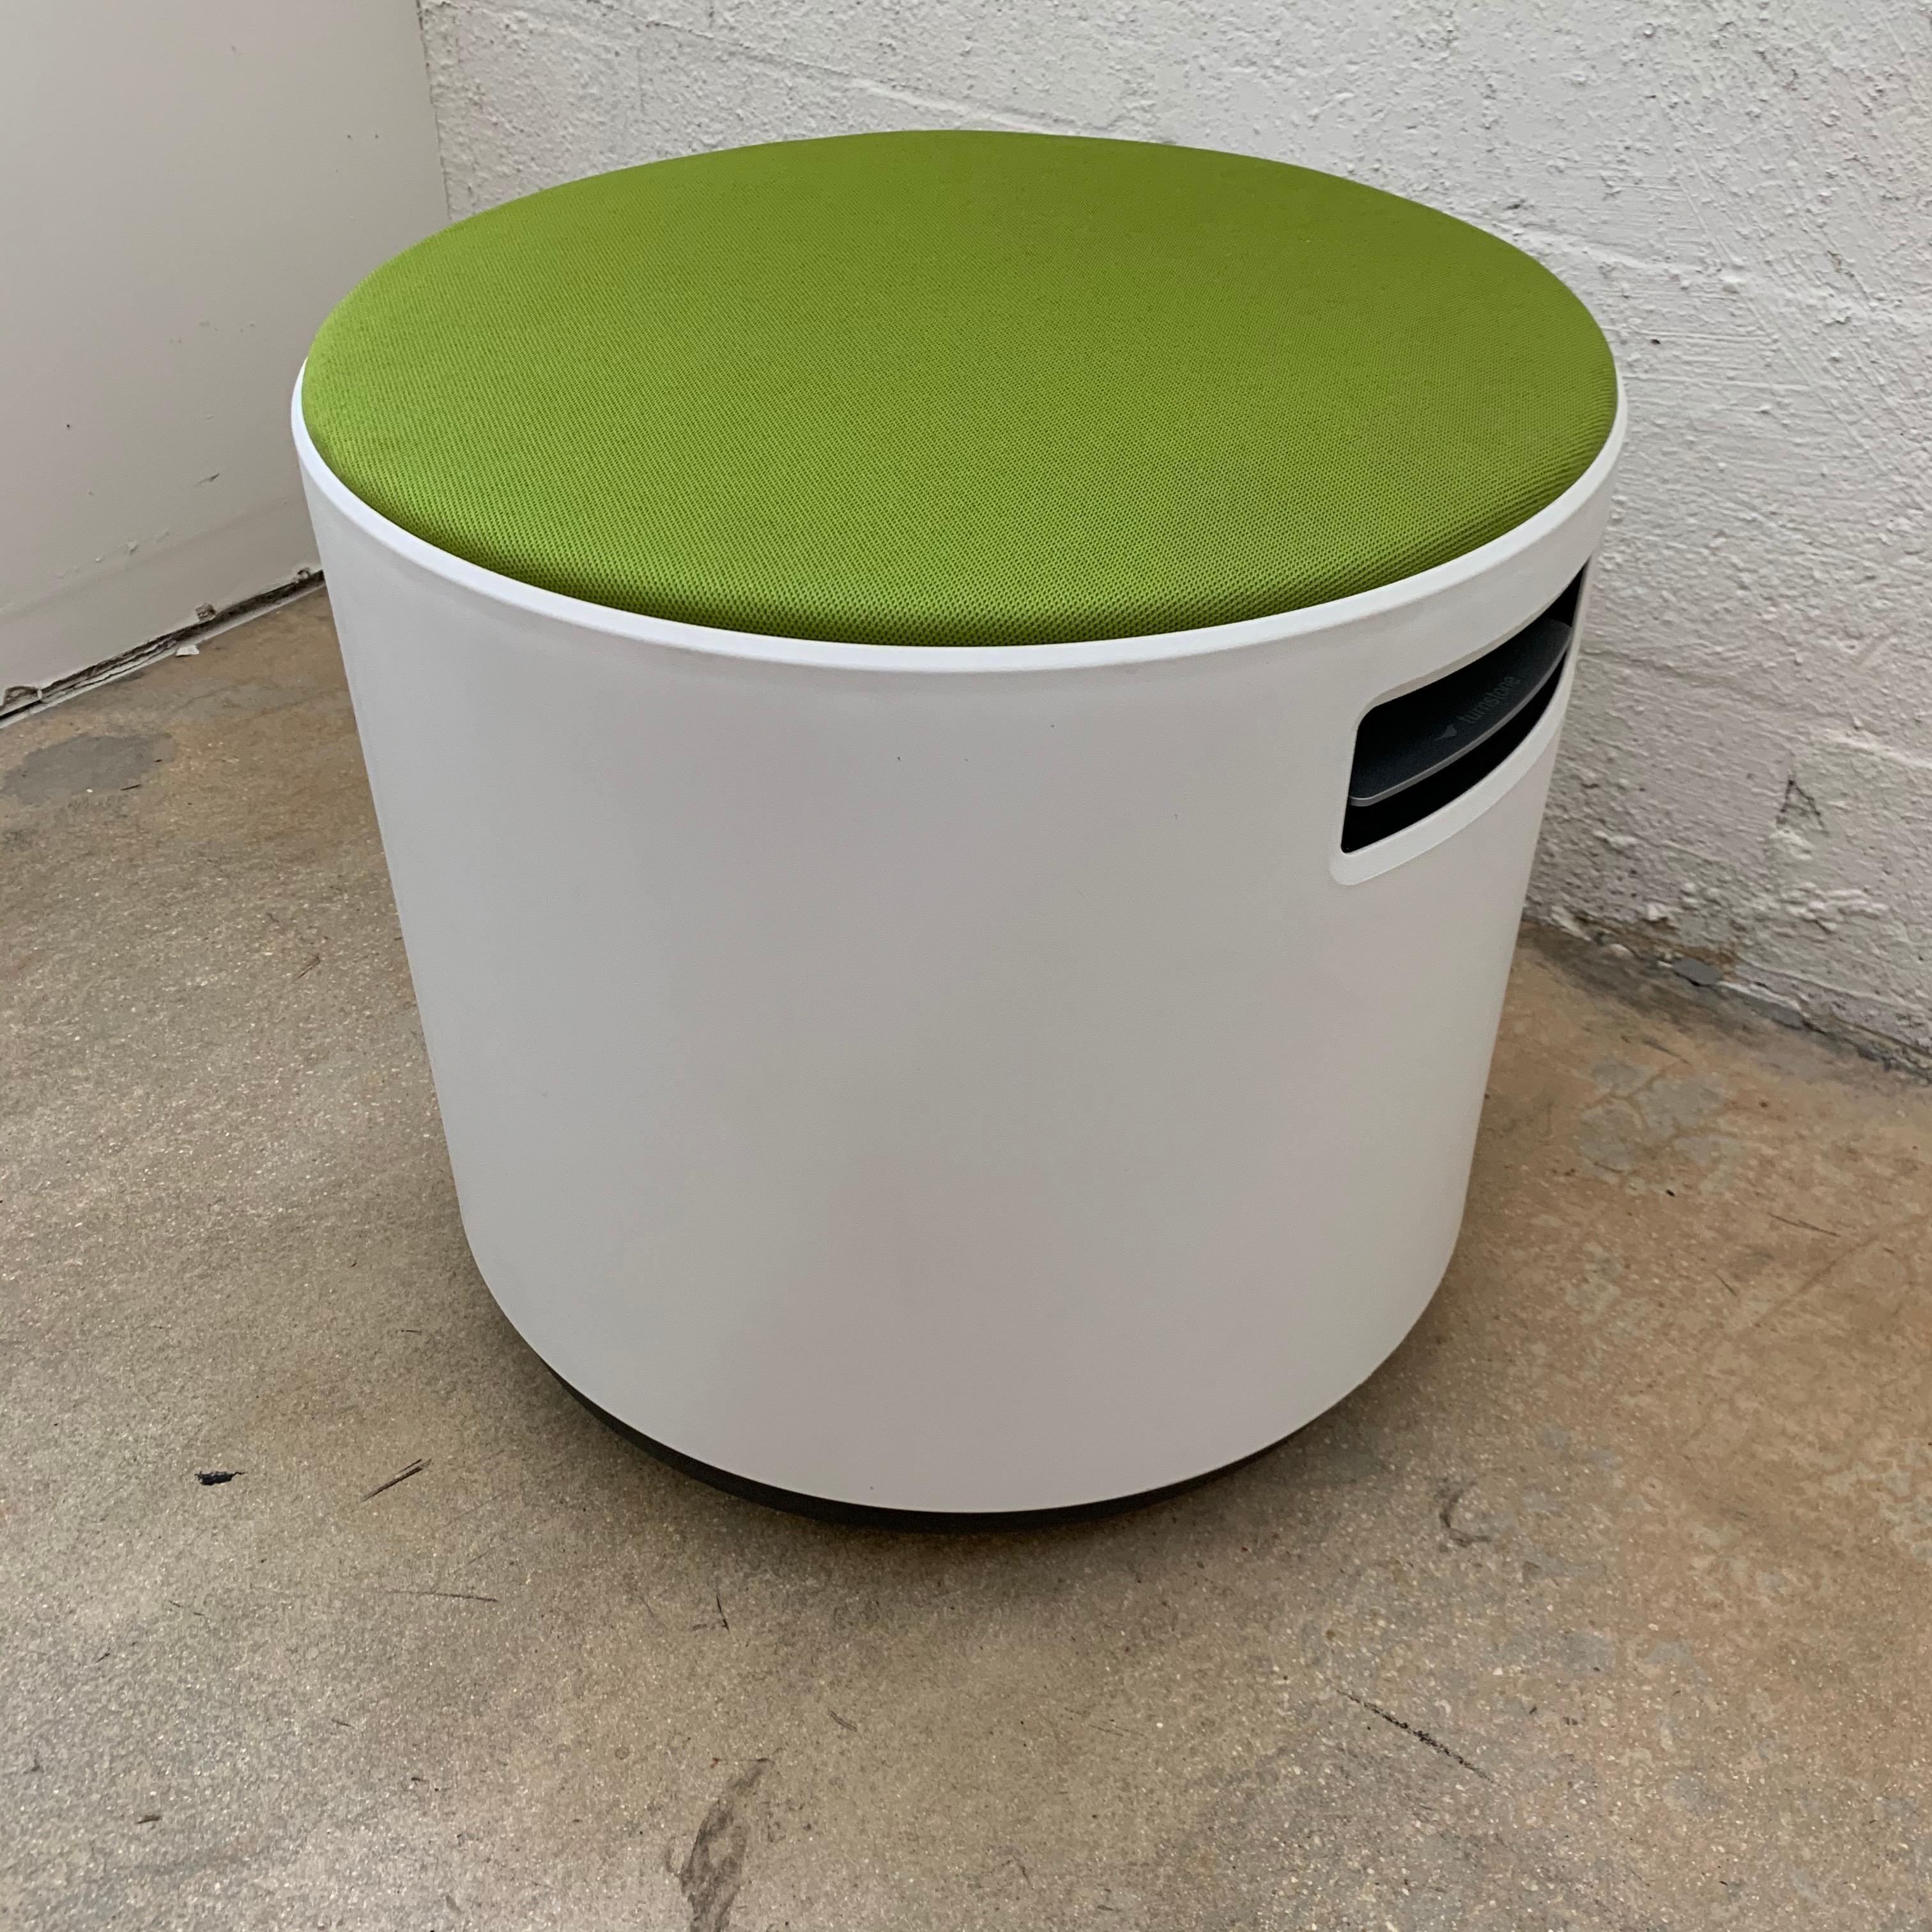 Rotating and tilting and adjustable height stool rendered in white polypropylene plastic with green upholstery by Steelcase.